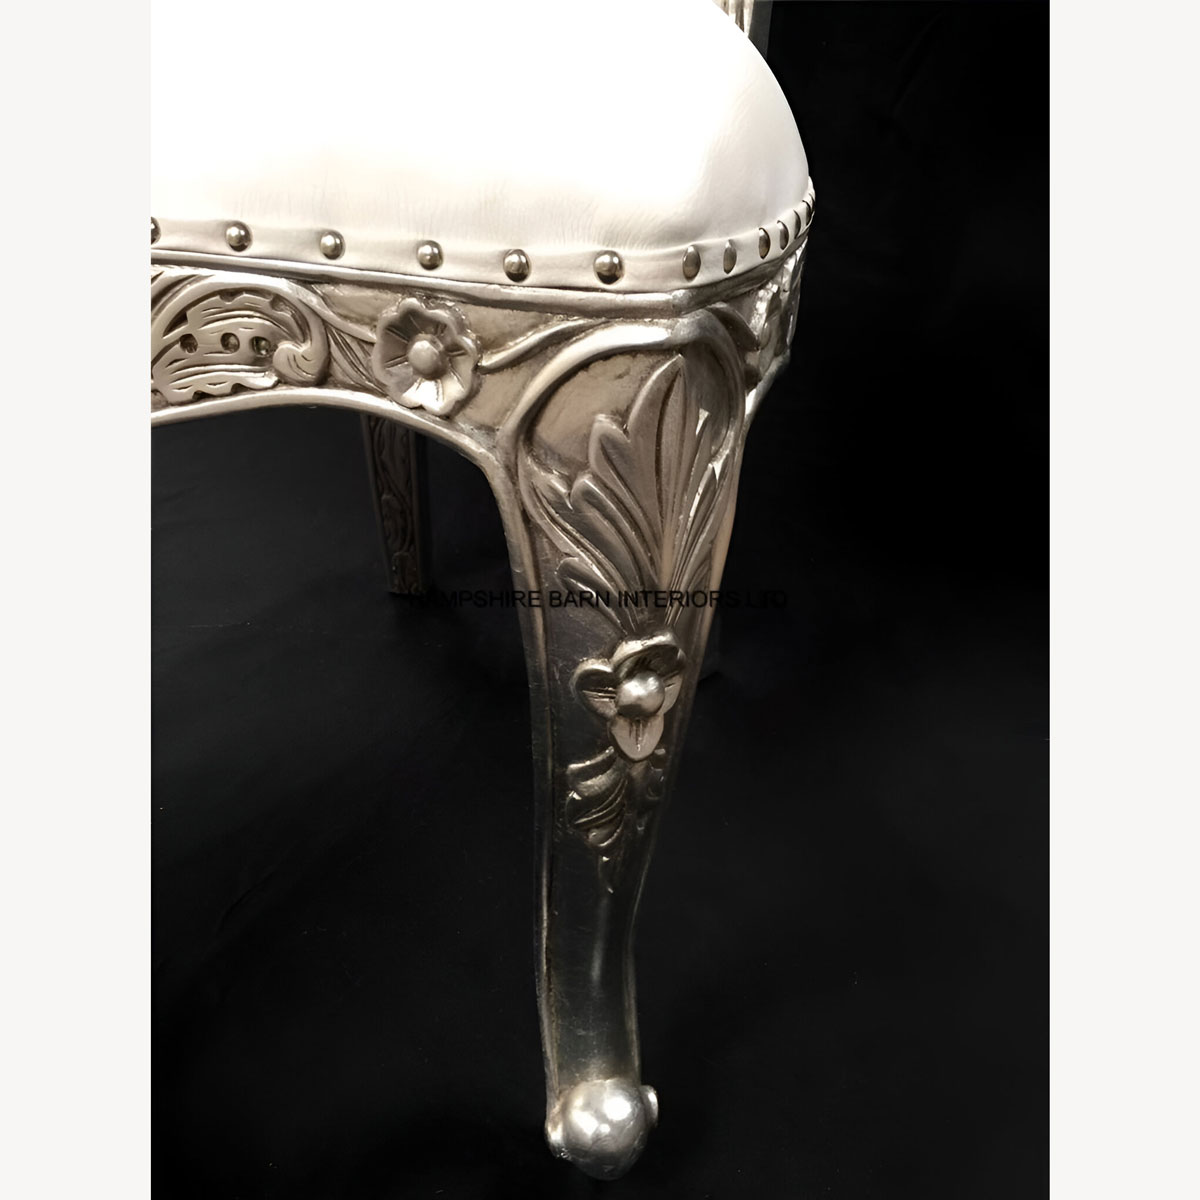 Avalon Ornate Silver Leaf Chair Upholstered In Easiclean White Faux Leather And Crystal Buttons 3 - Hampshire Barn Interiors - Avalon Ornate Silver Leaf Chair Upholstered In Easiclean White Faux Leather And Crystal Buttons -